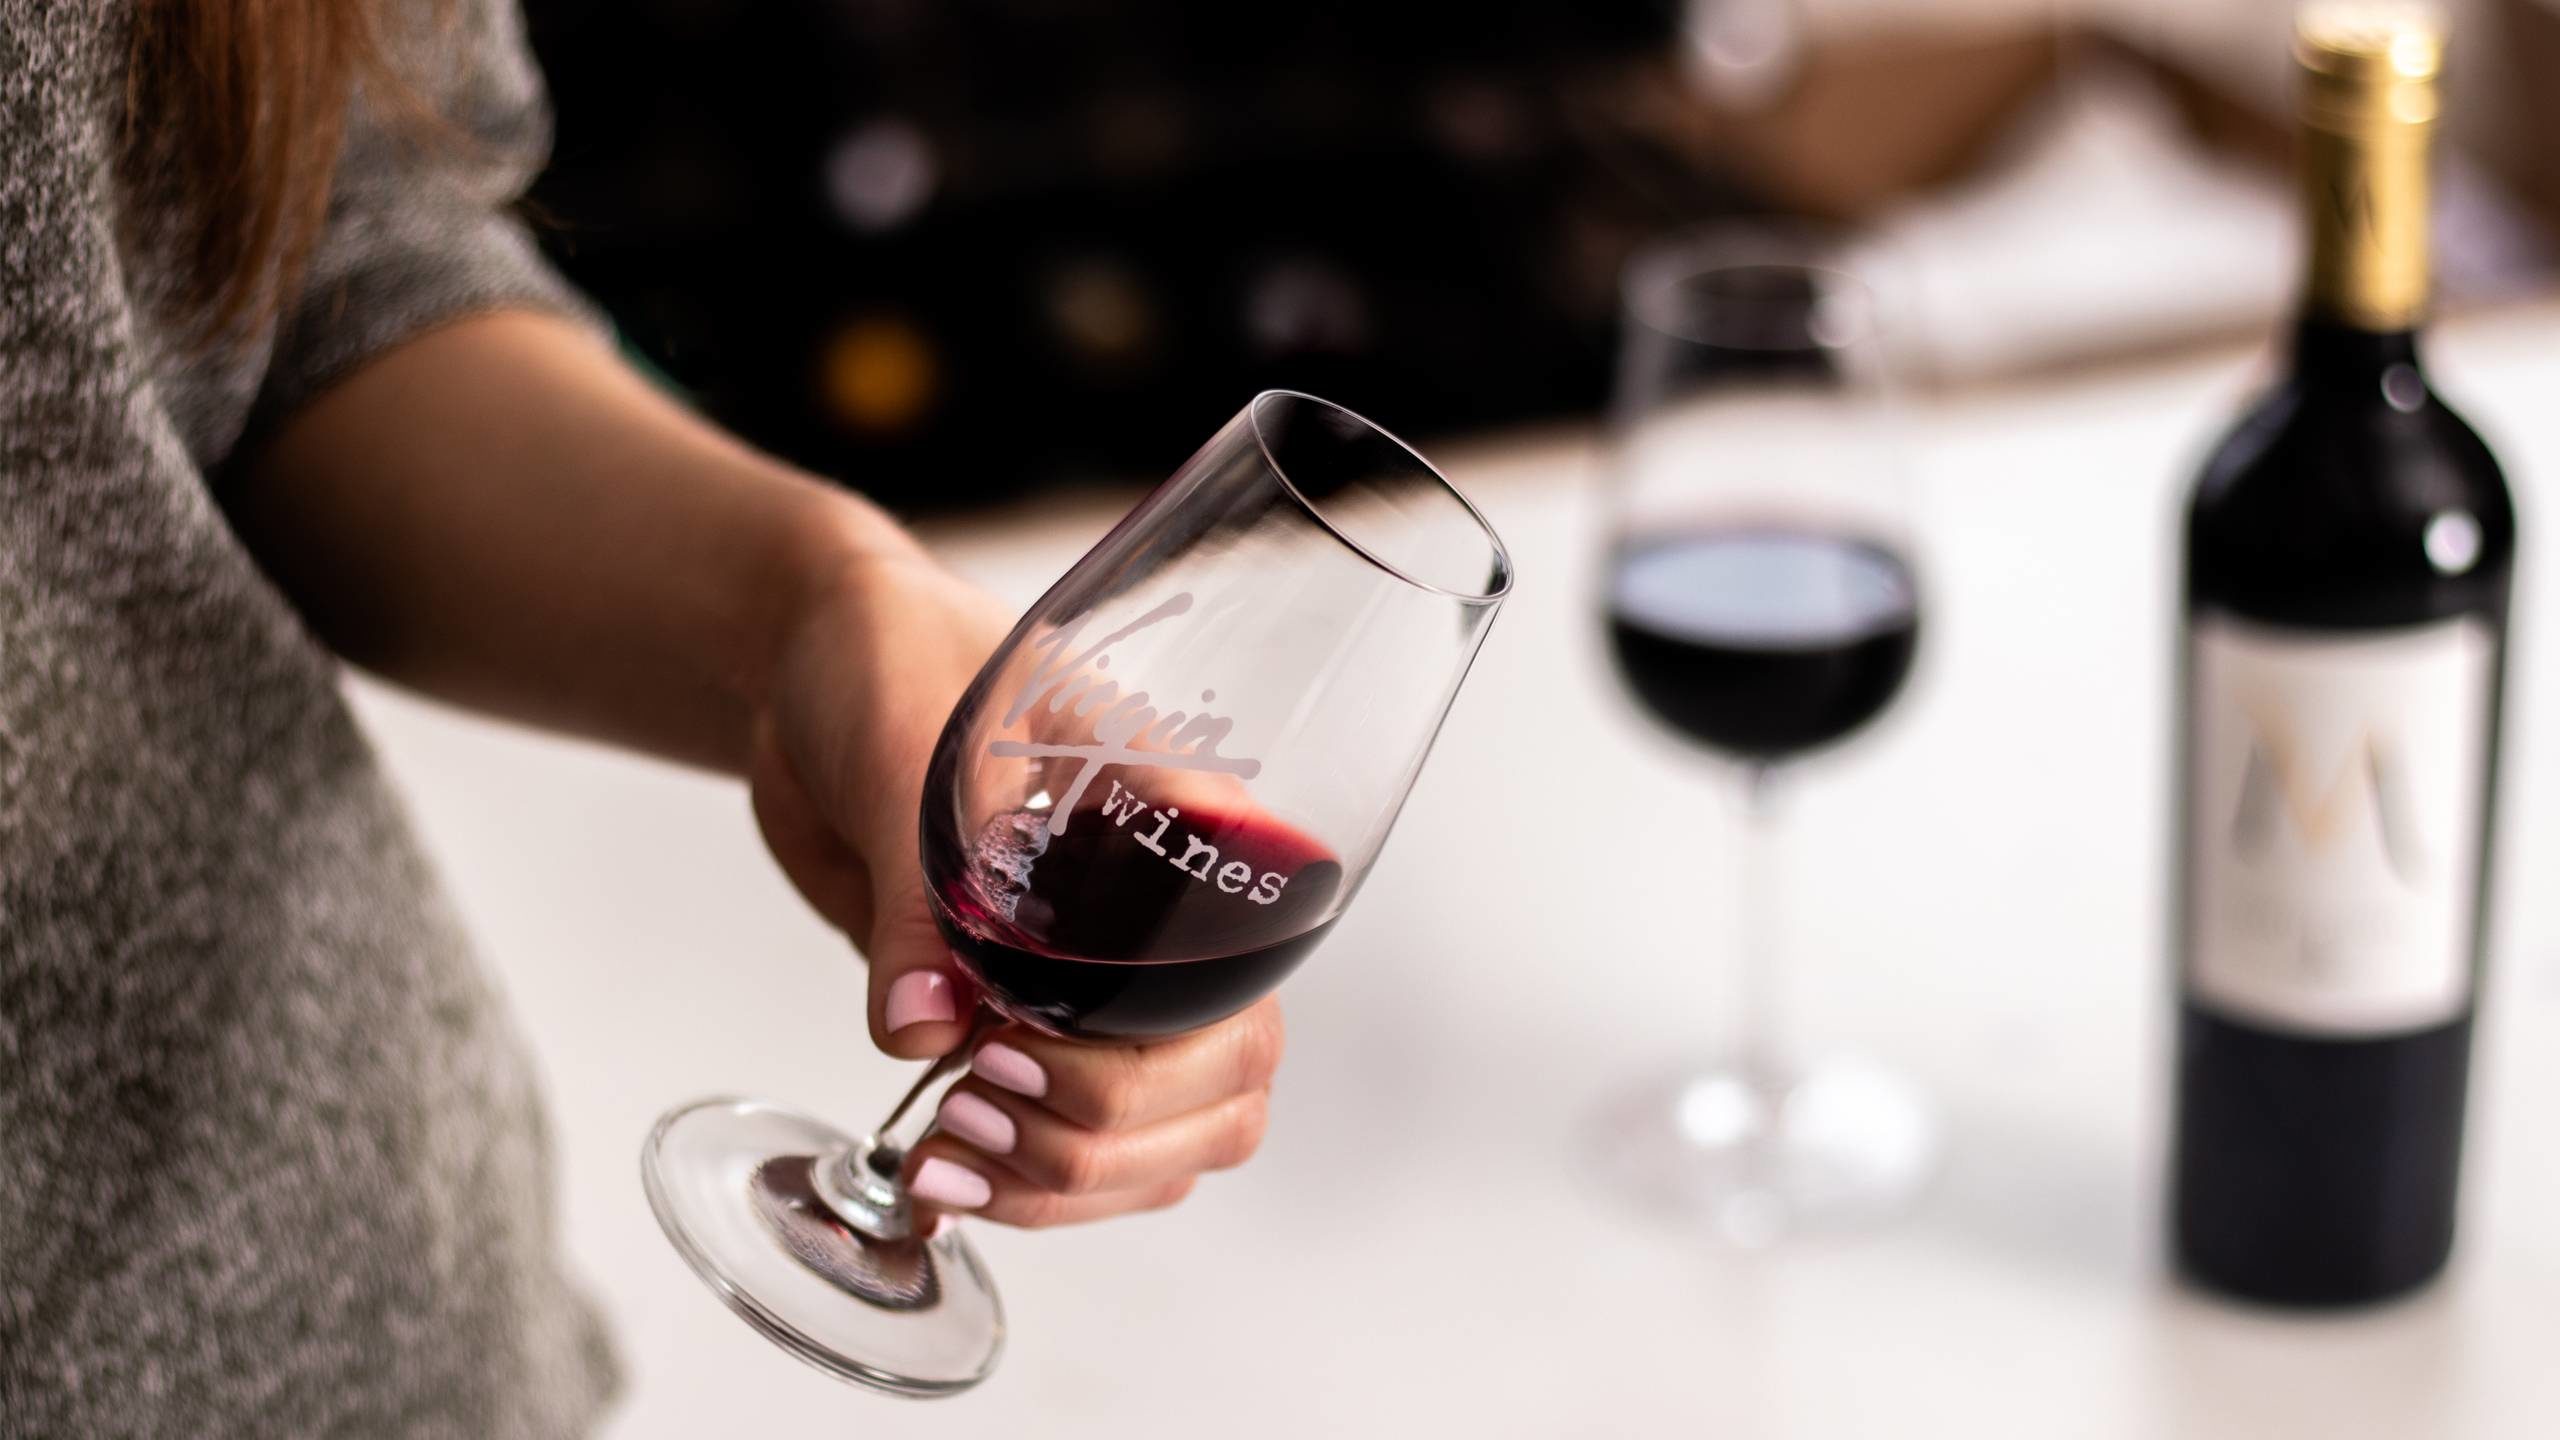 The major factors driving up the prices of US wine